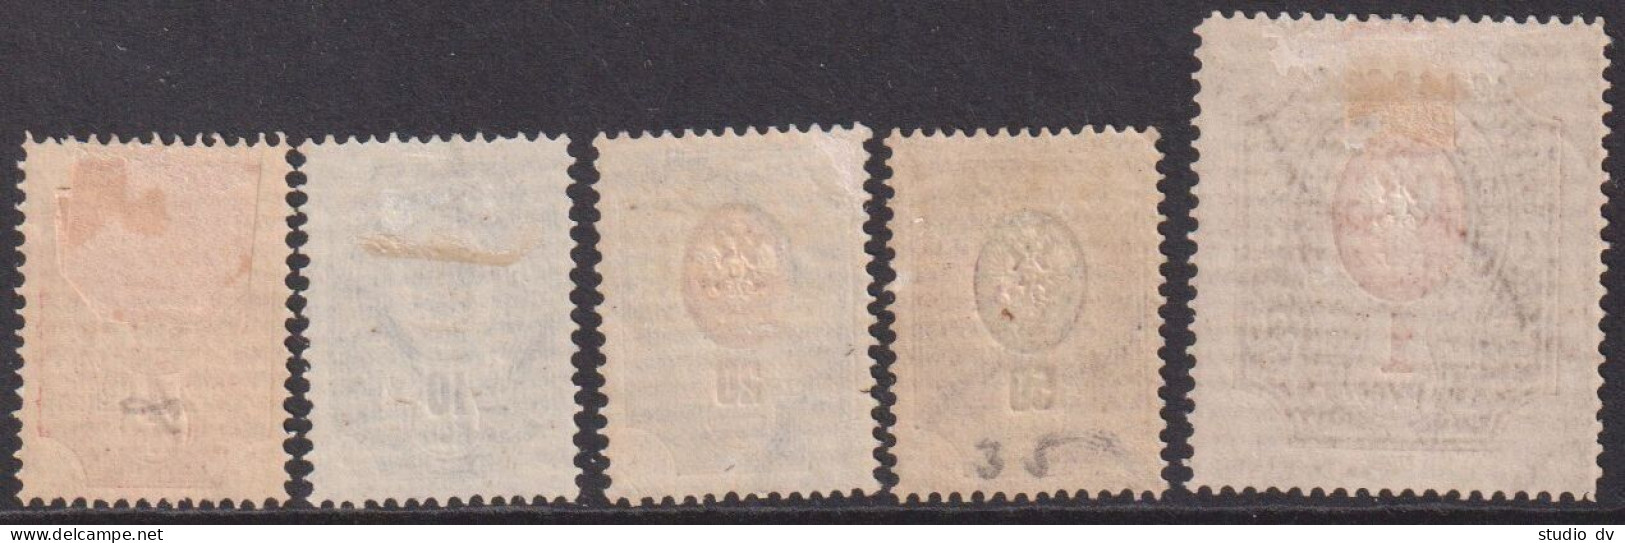 Russia 1889 10th Issue 4-50k, 1R Horizontal Watermark, Mi 40x-44x MLH - Unused Stamps